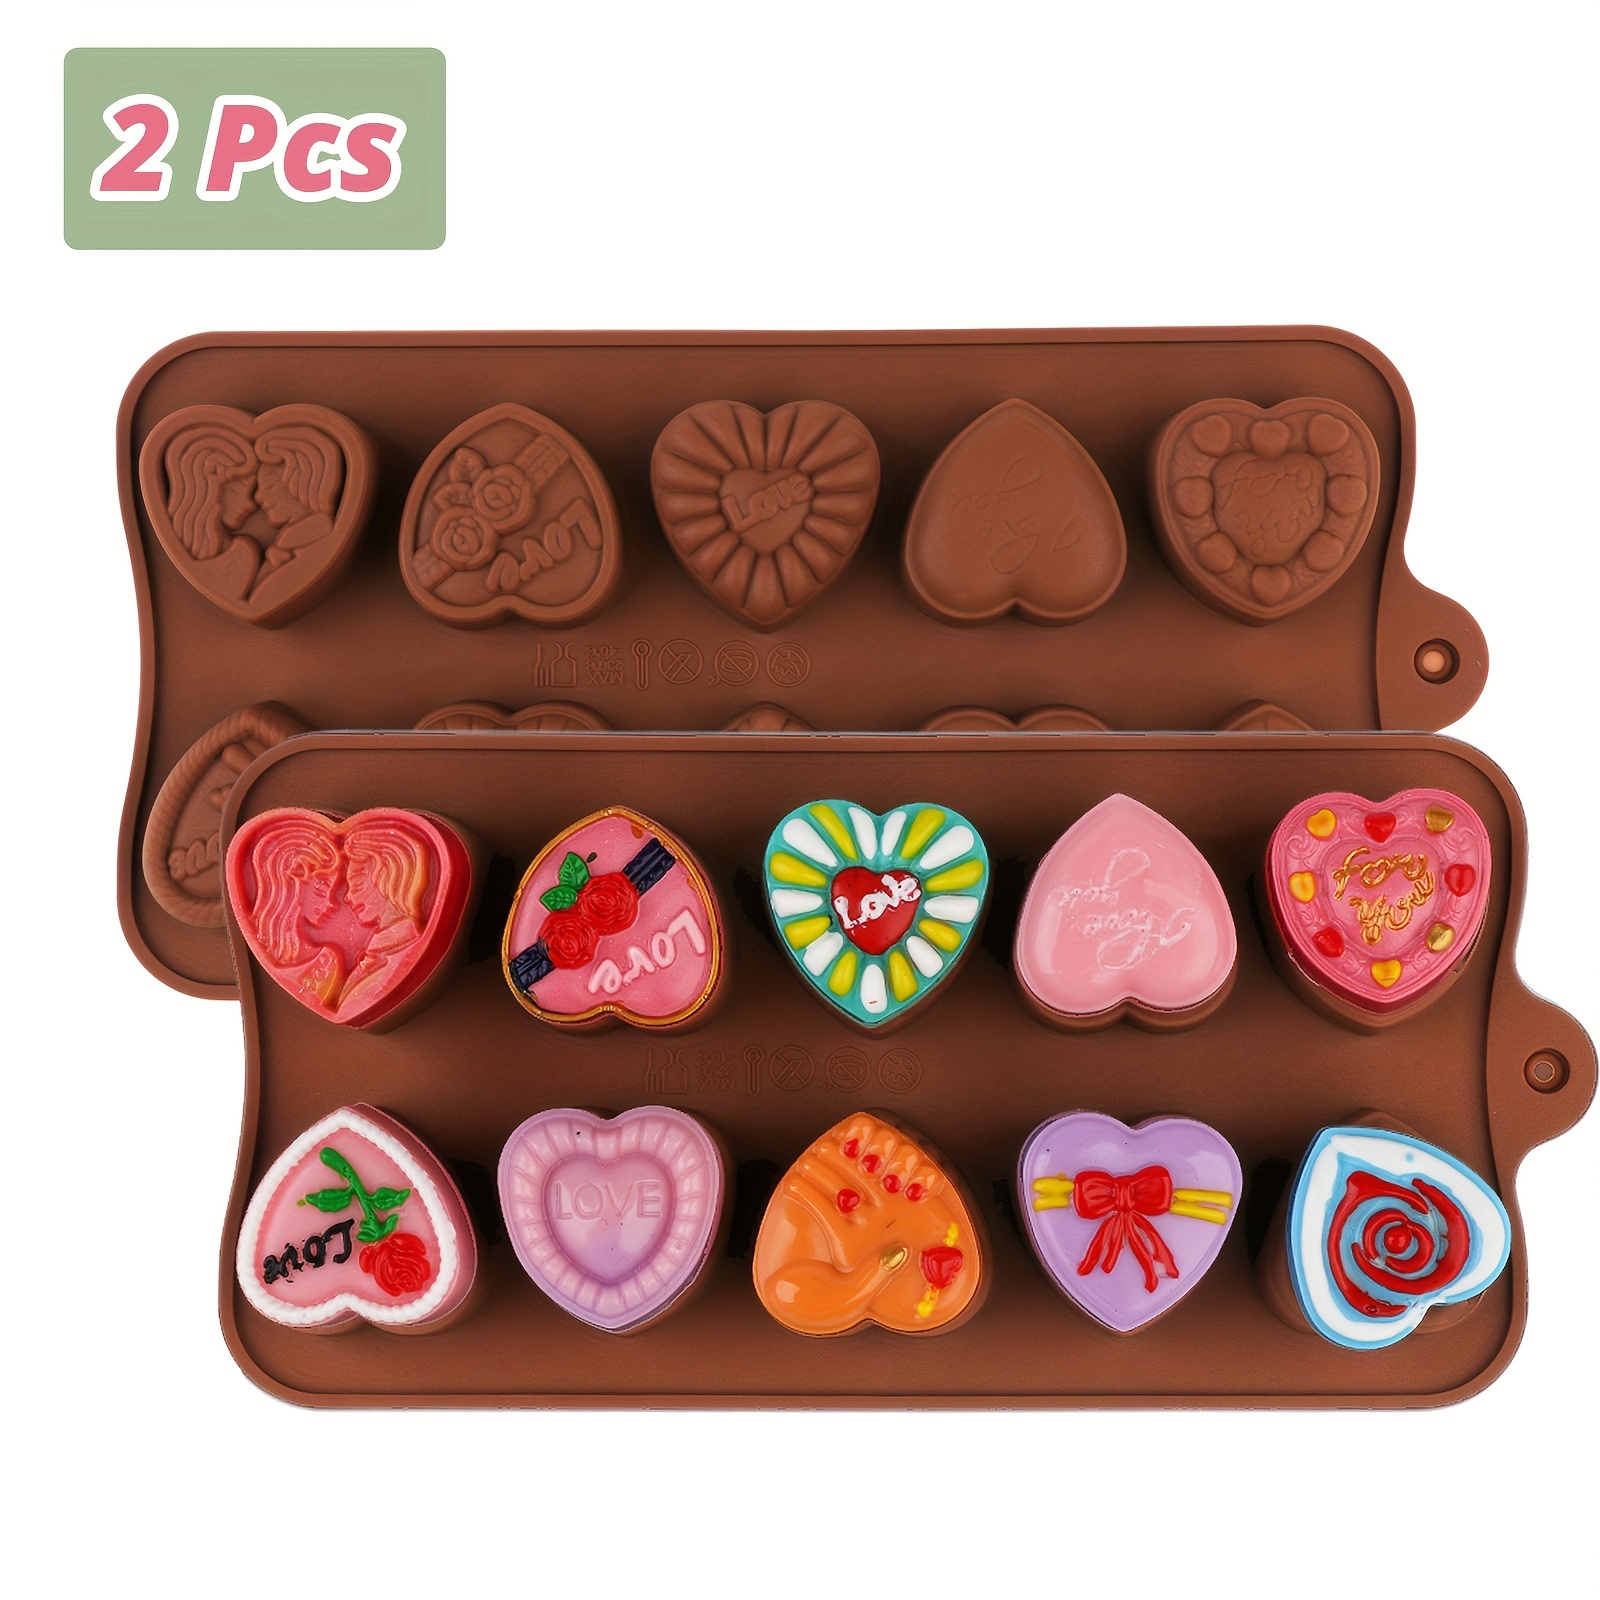 Love Chocolate Silicone Mold Diy Handmade Lollipop Mold Heart-shaped  Fondant Mold Cake Decoration Accessories Valentine's Day